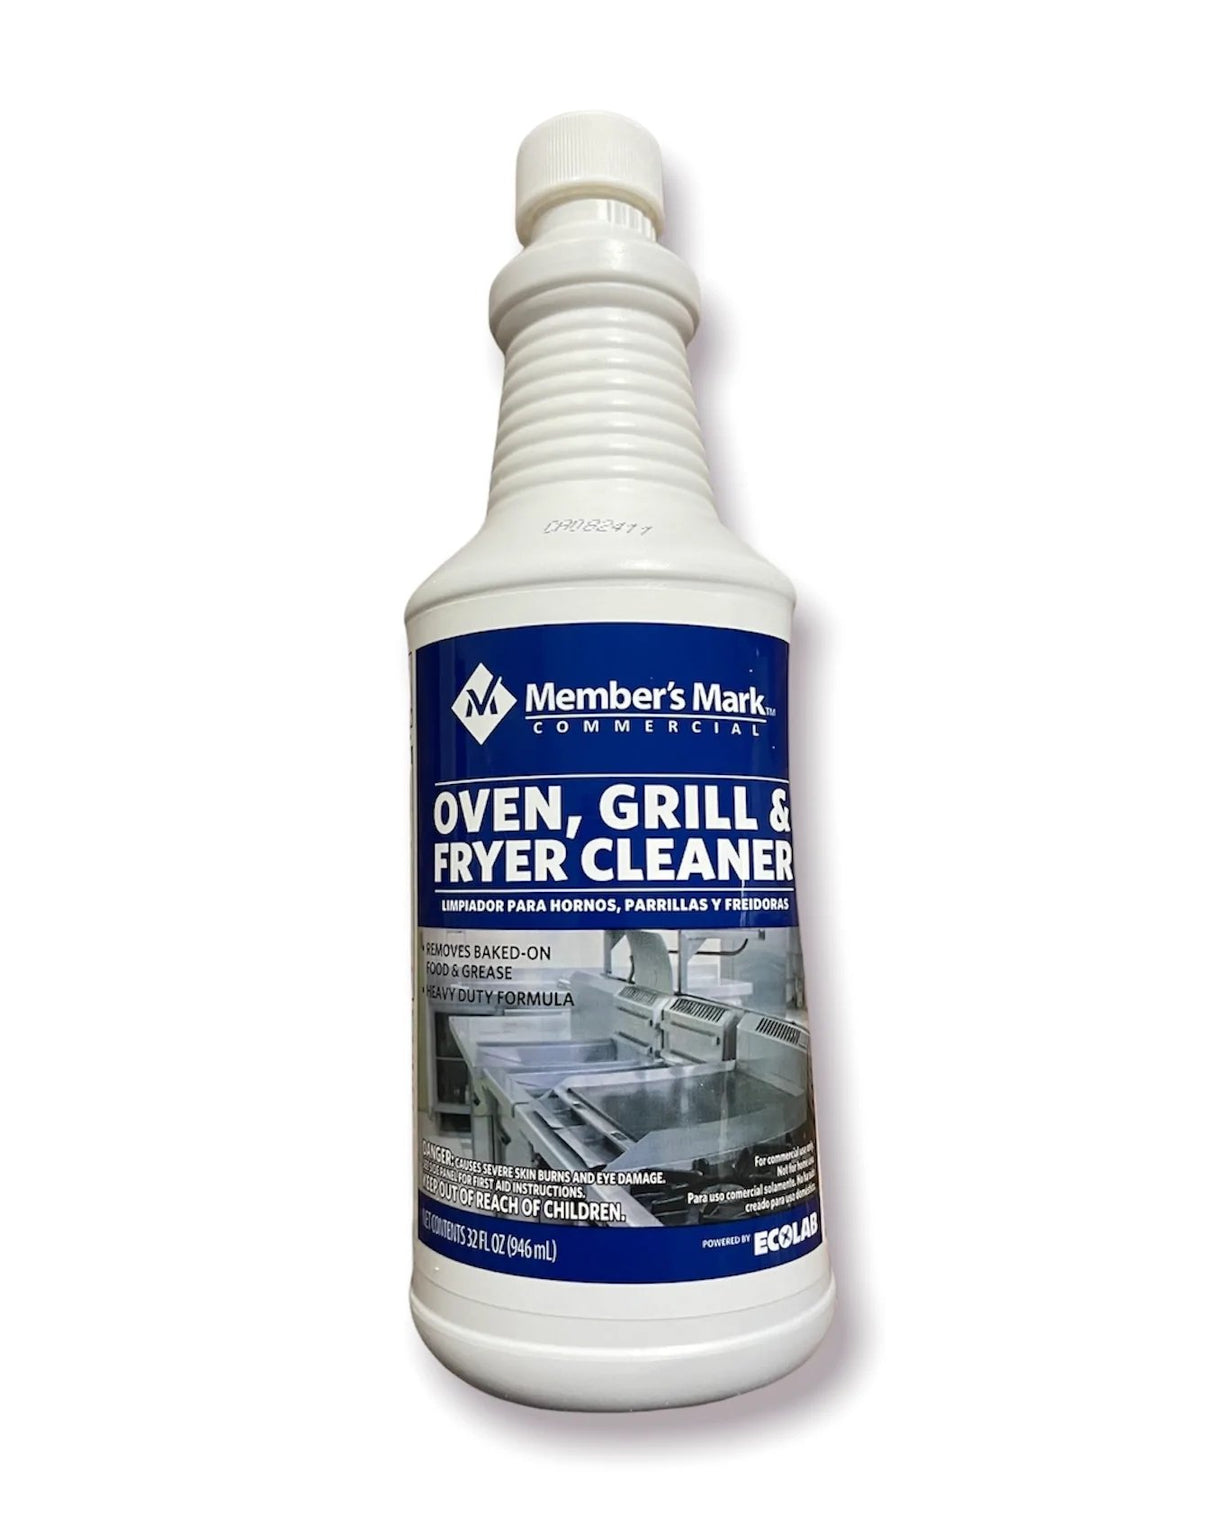 Member's Mark Commercial Oven, Grill and Fryer Cleaner (32 oz)